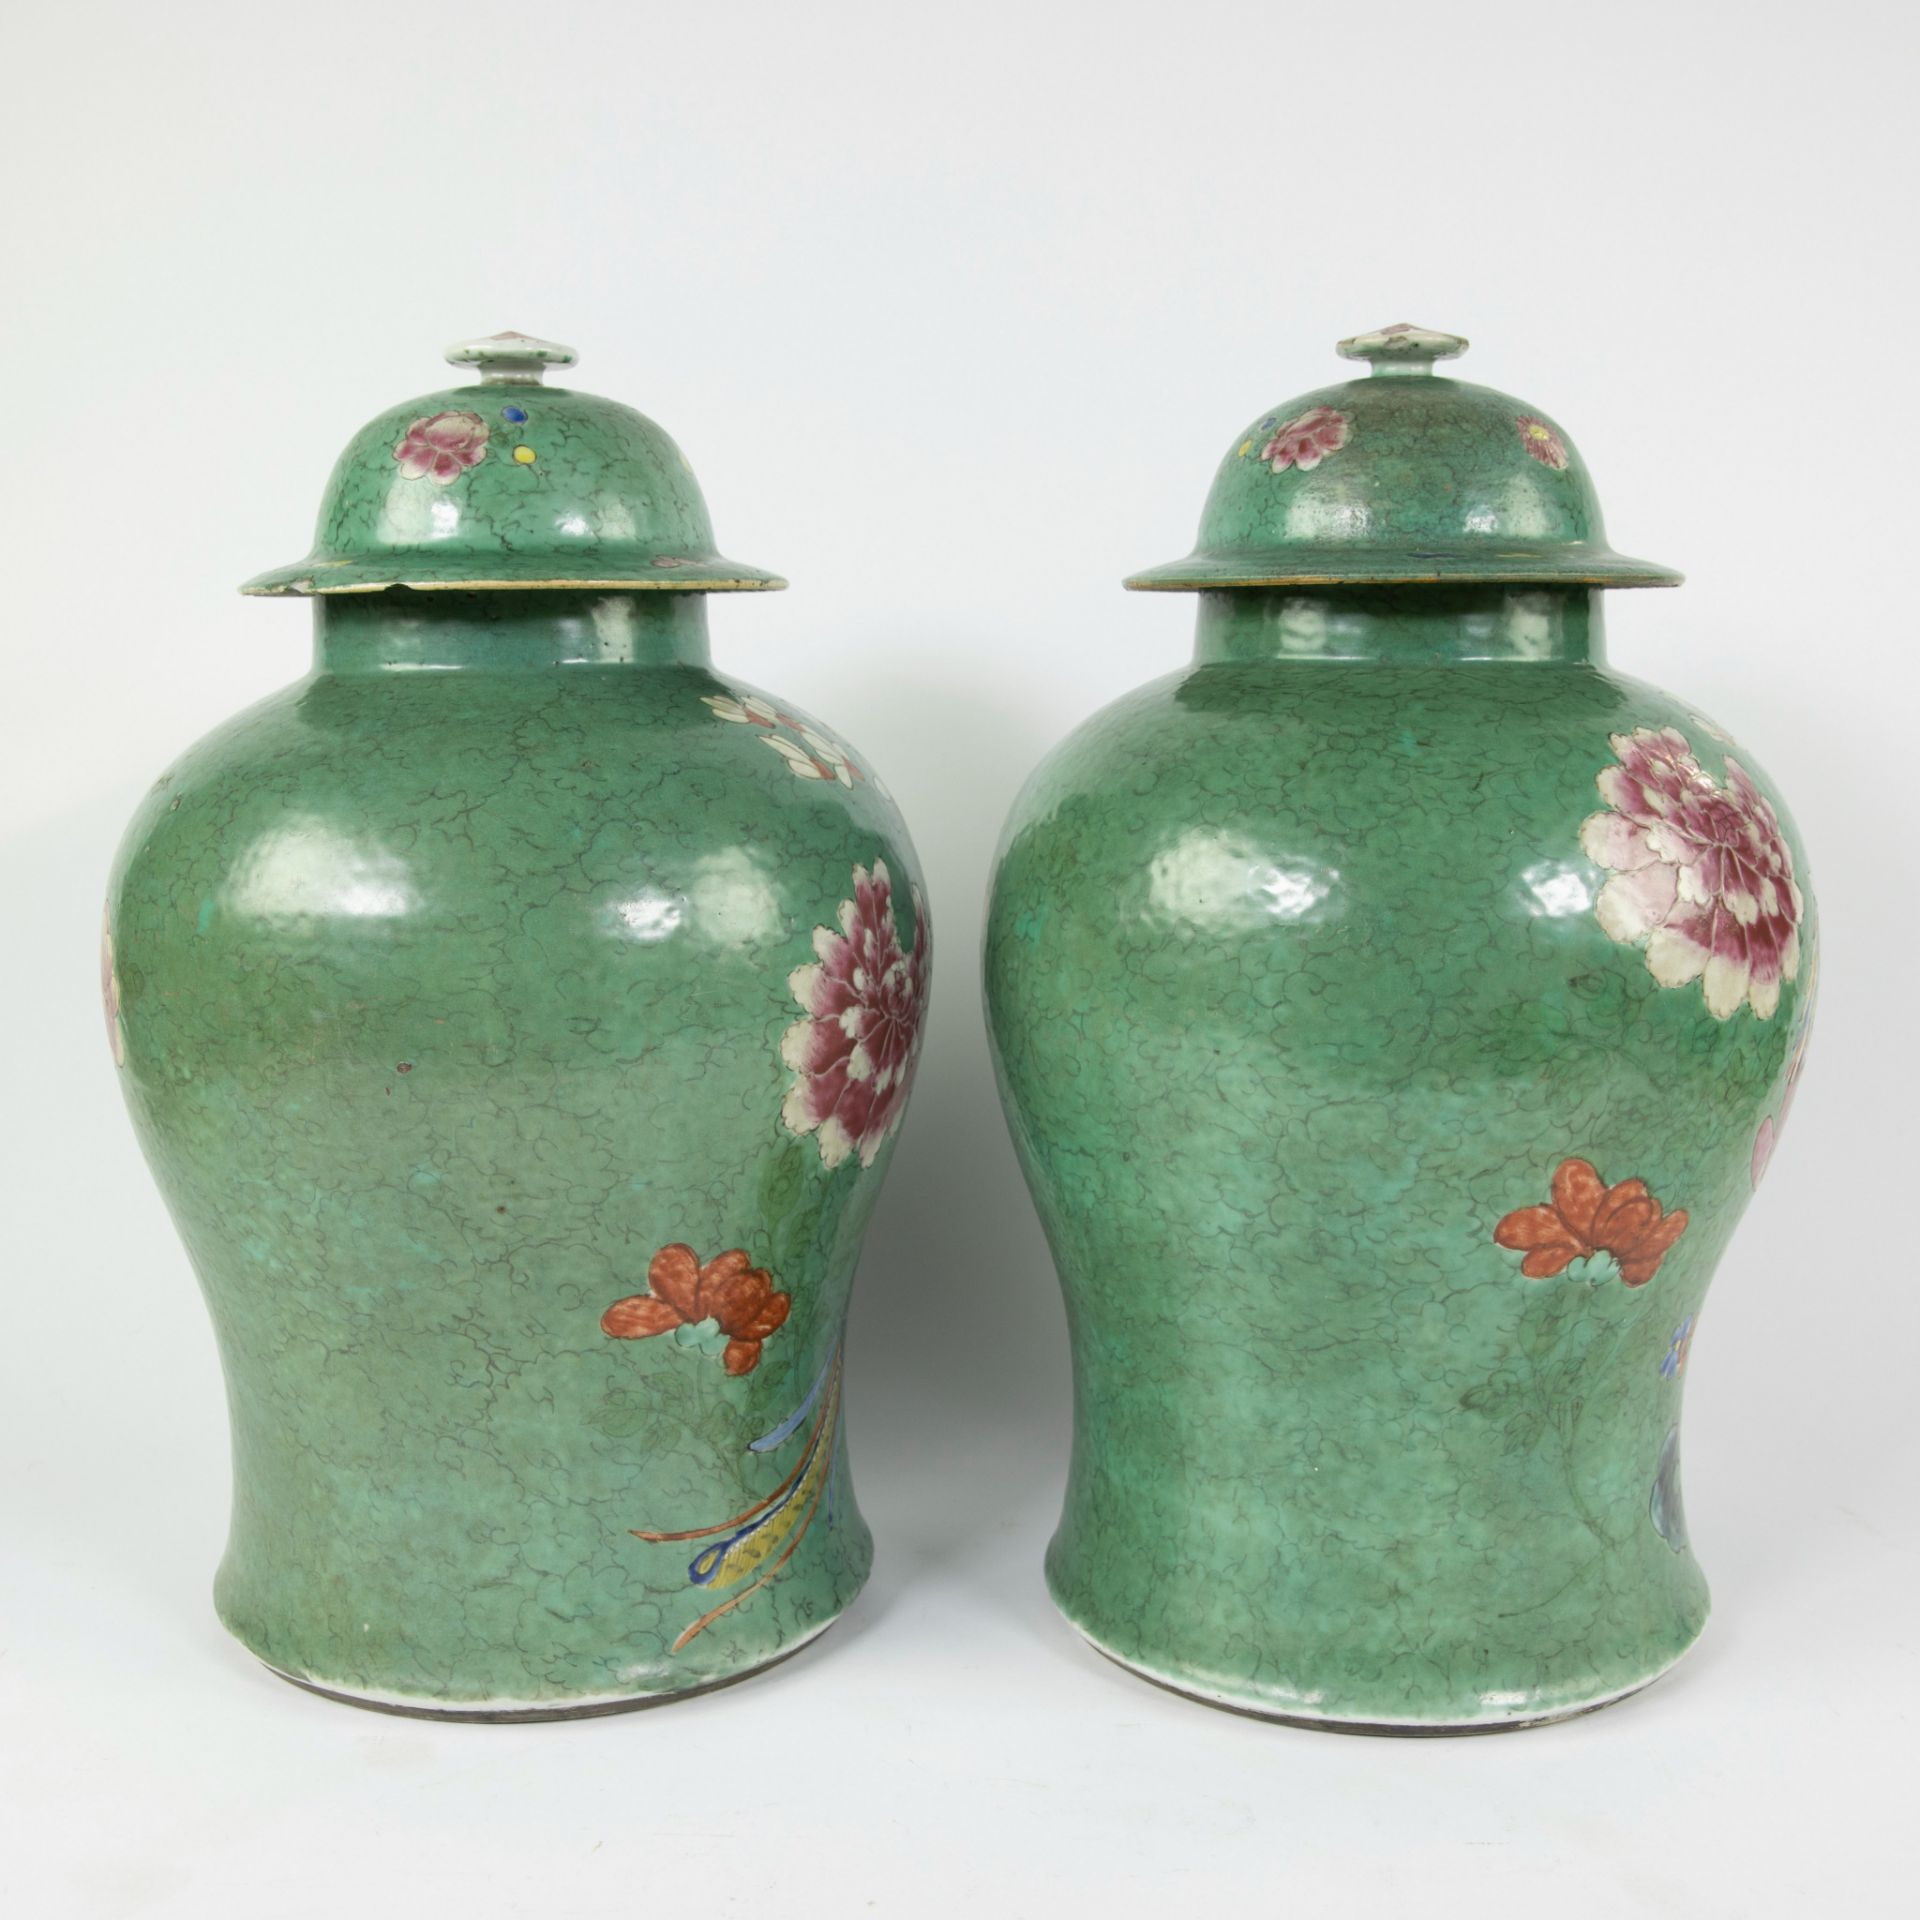 Pair of Chinese baluster shaped jars and their covers symmetrically decorated in fencai enamels depi - Image 7 of 12